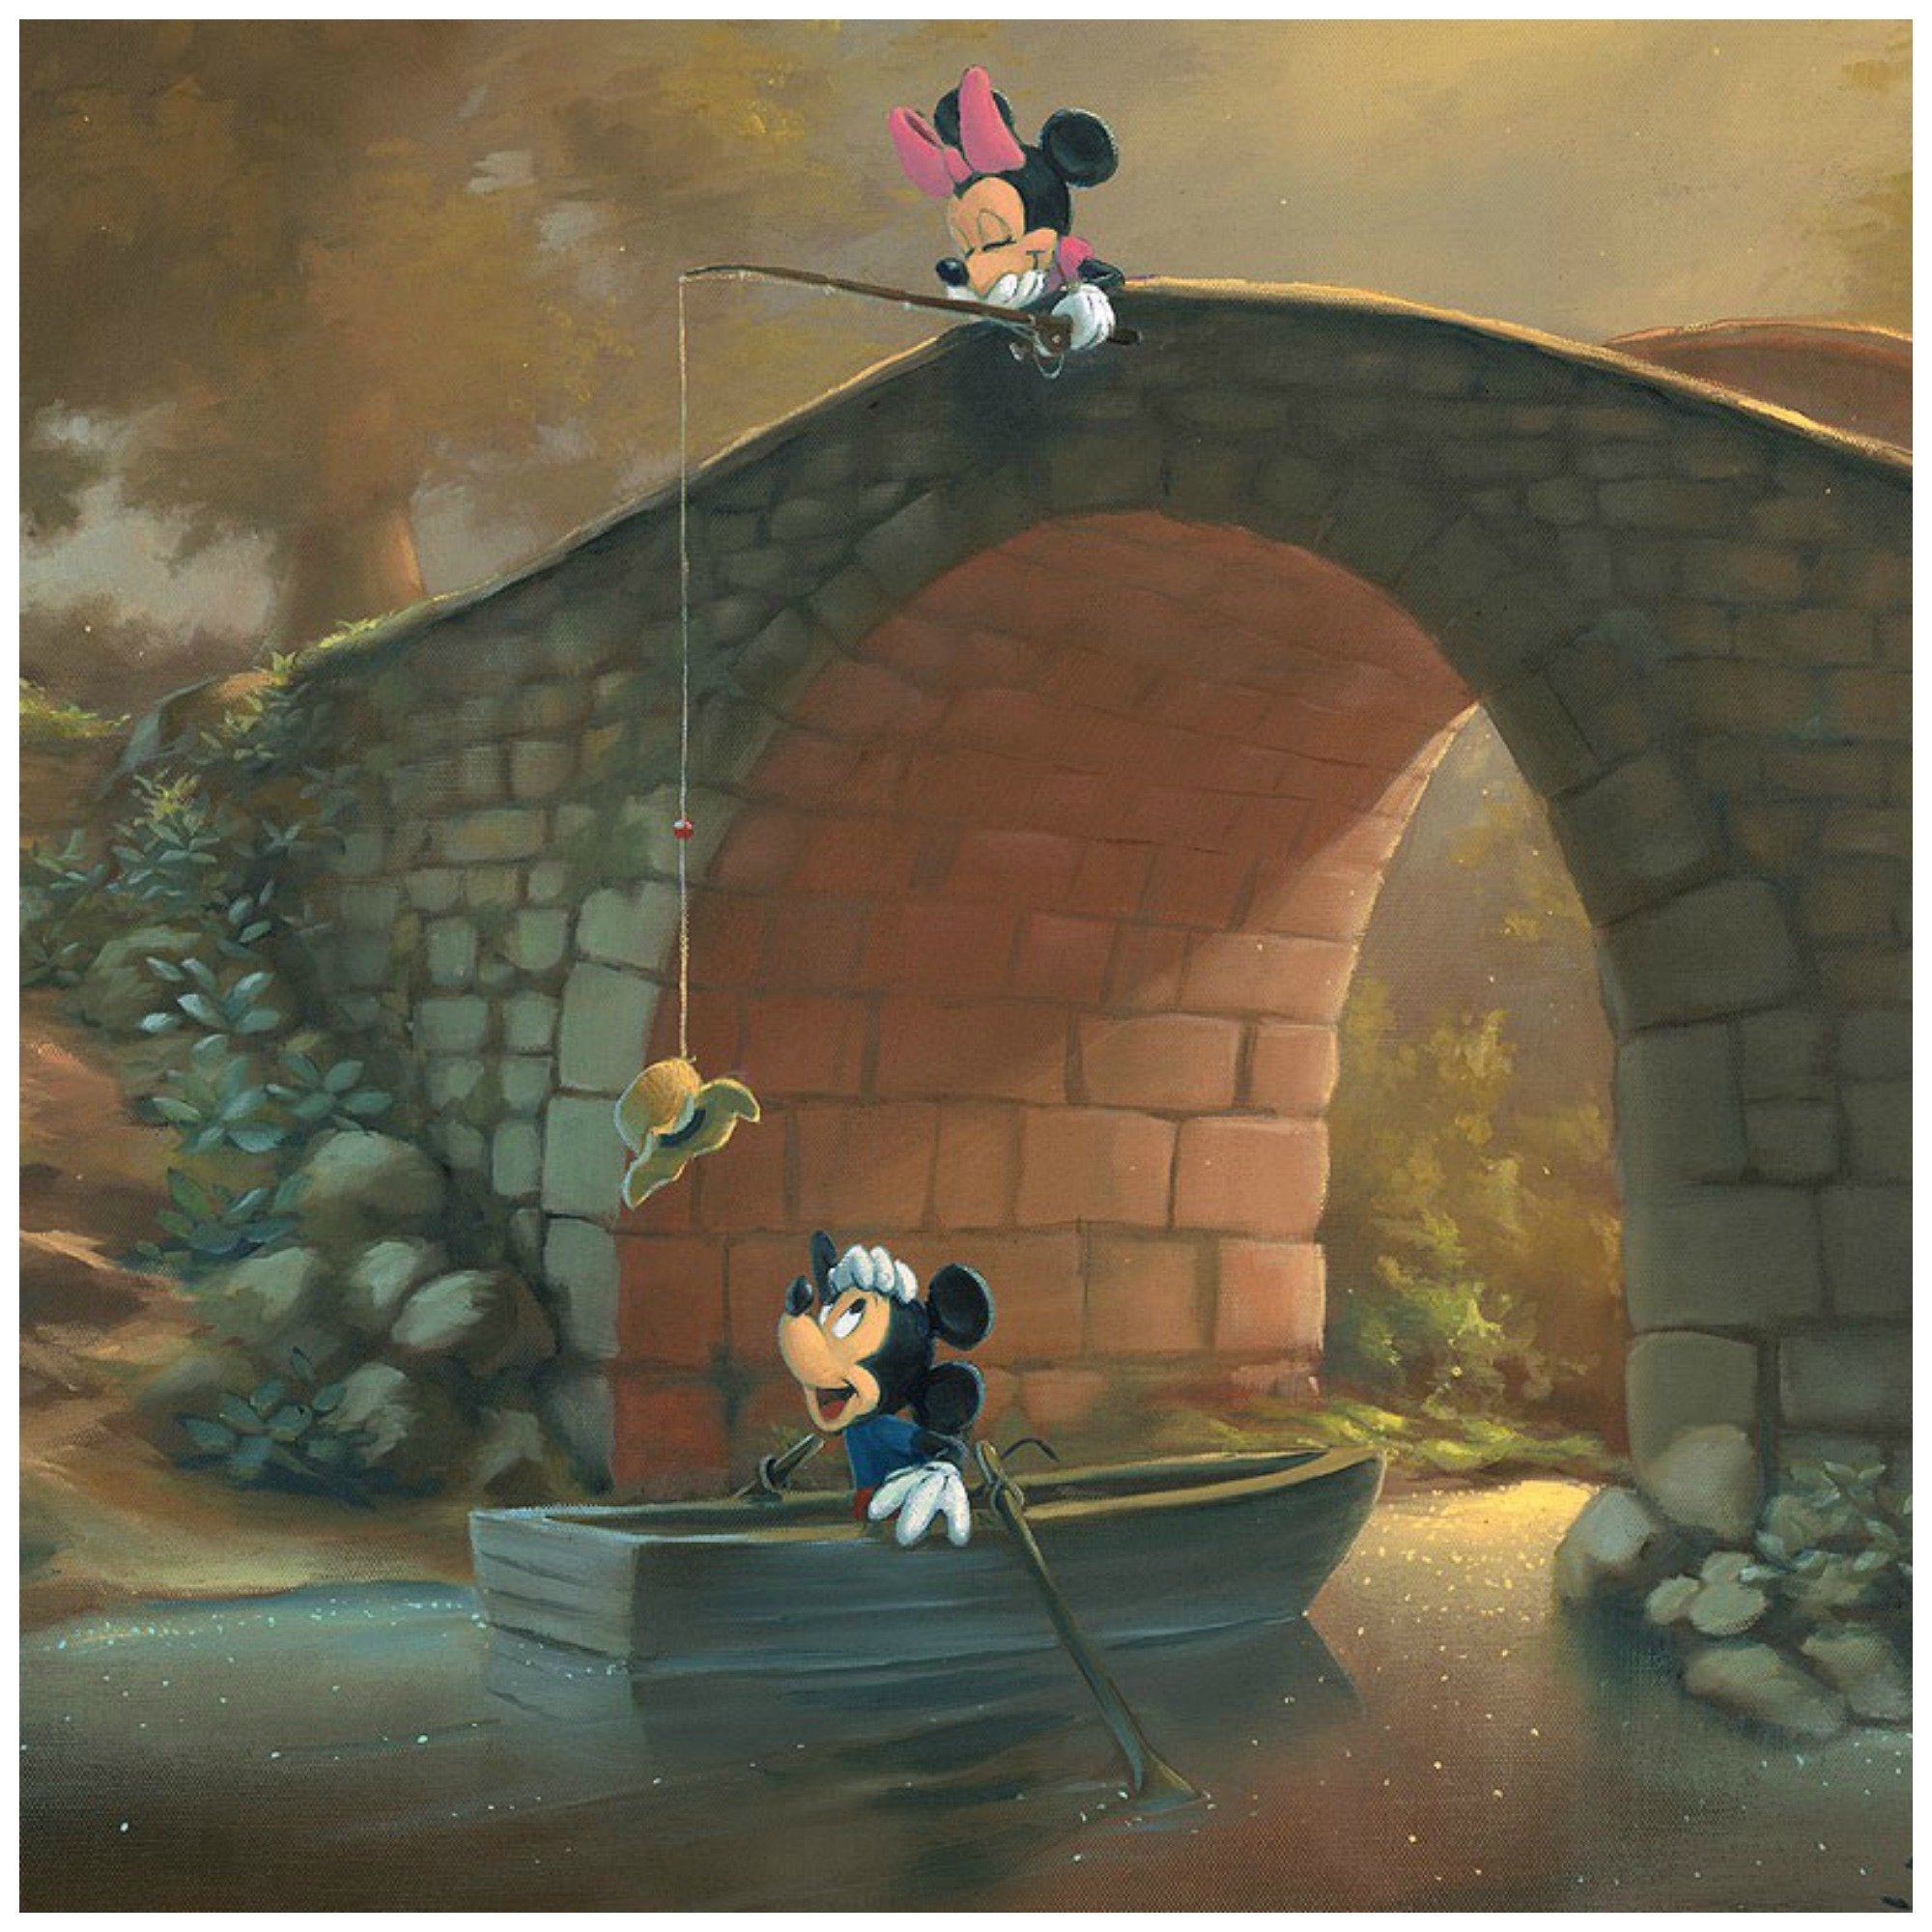 Hooked On You by Rob Kaz.  Minnie surprises Mickey as she catches his hat with her fishing pole from on top of the bridge - closeup